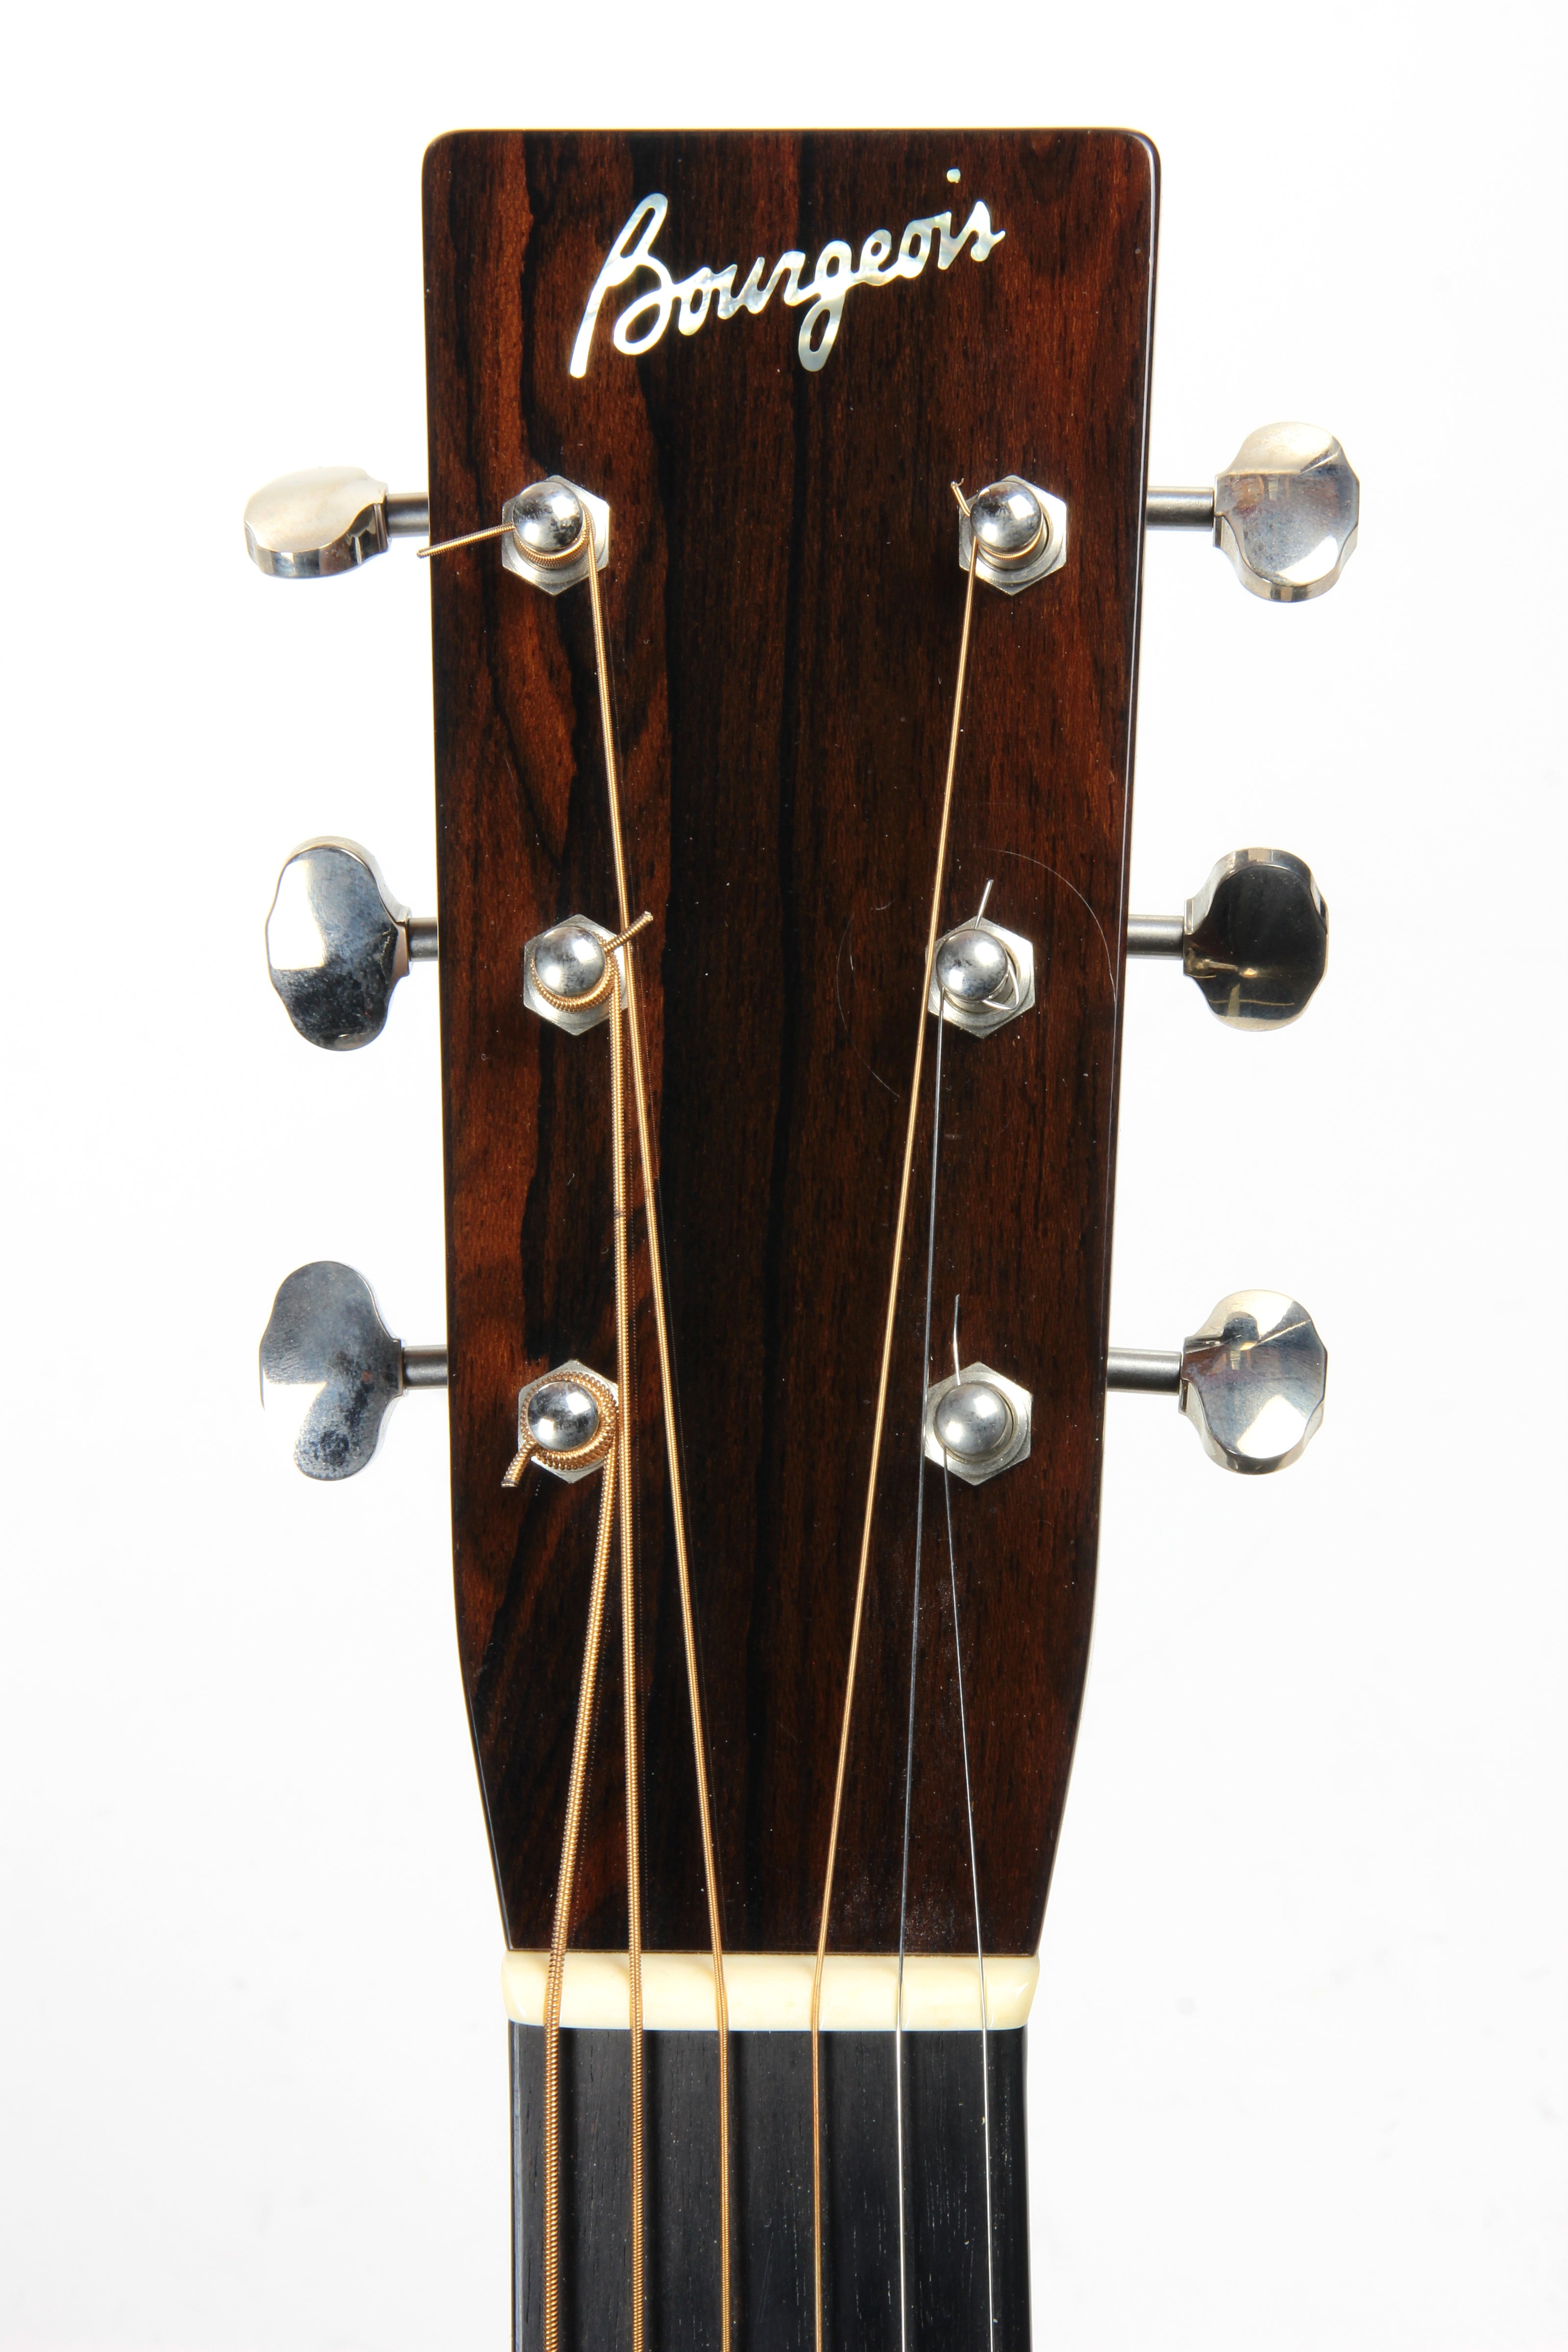 Bourgeois headstock with brand logo